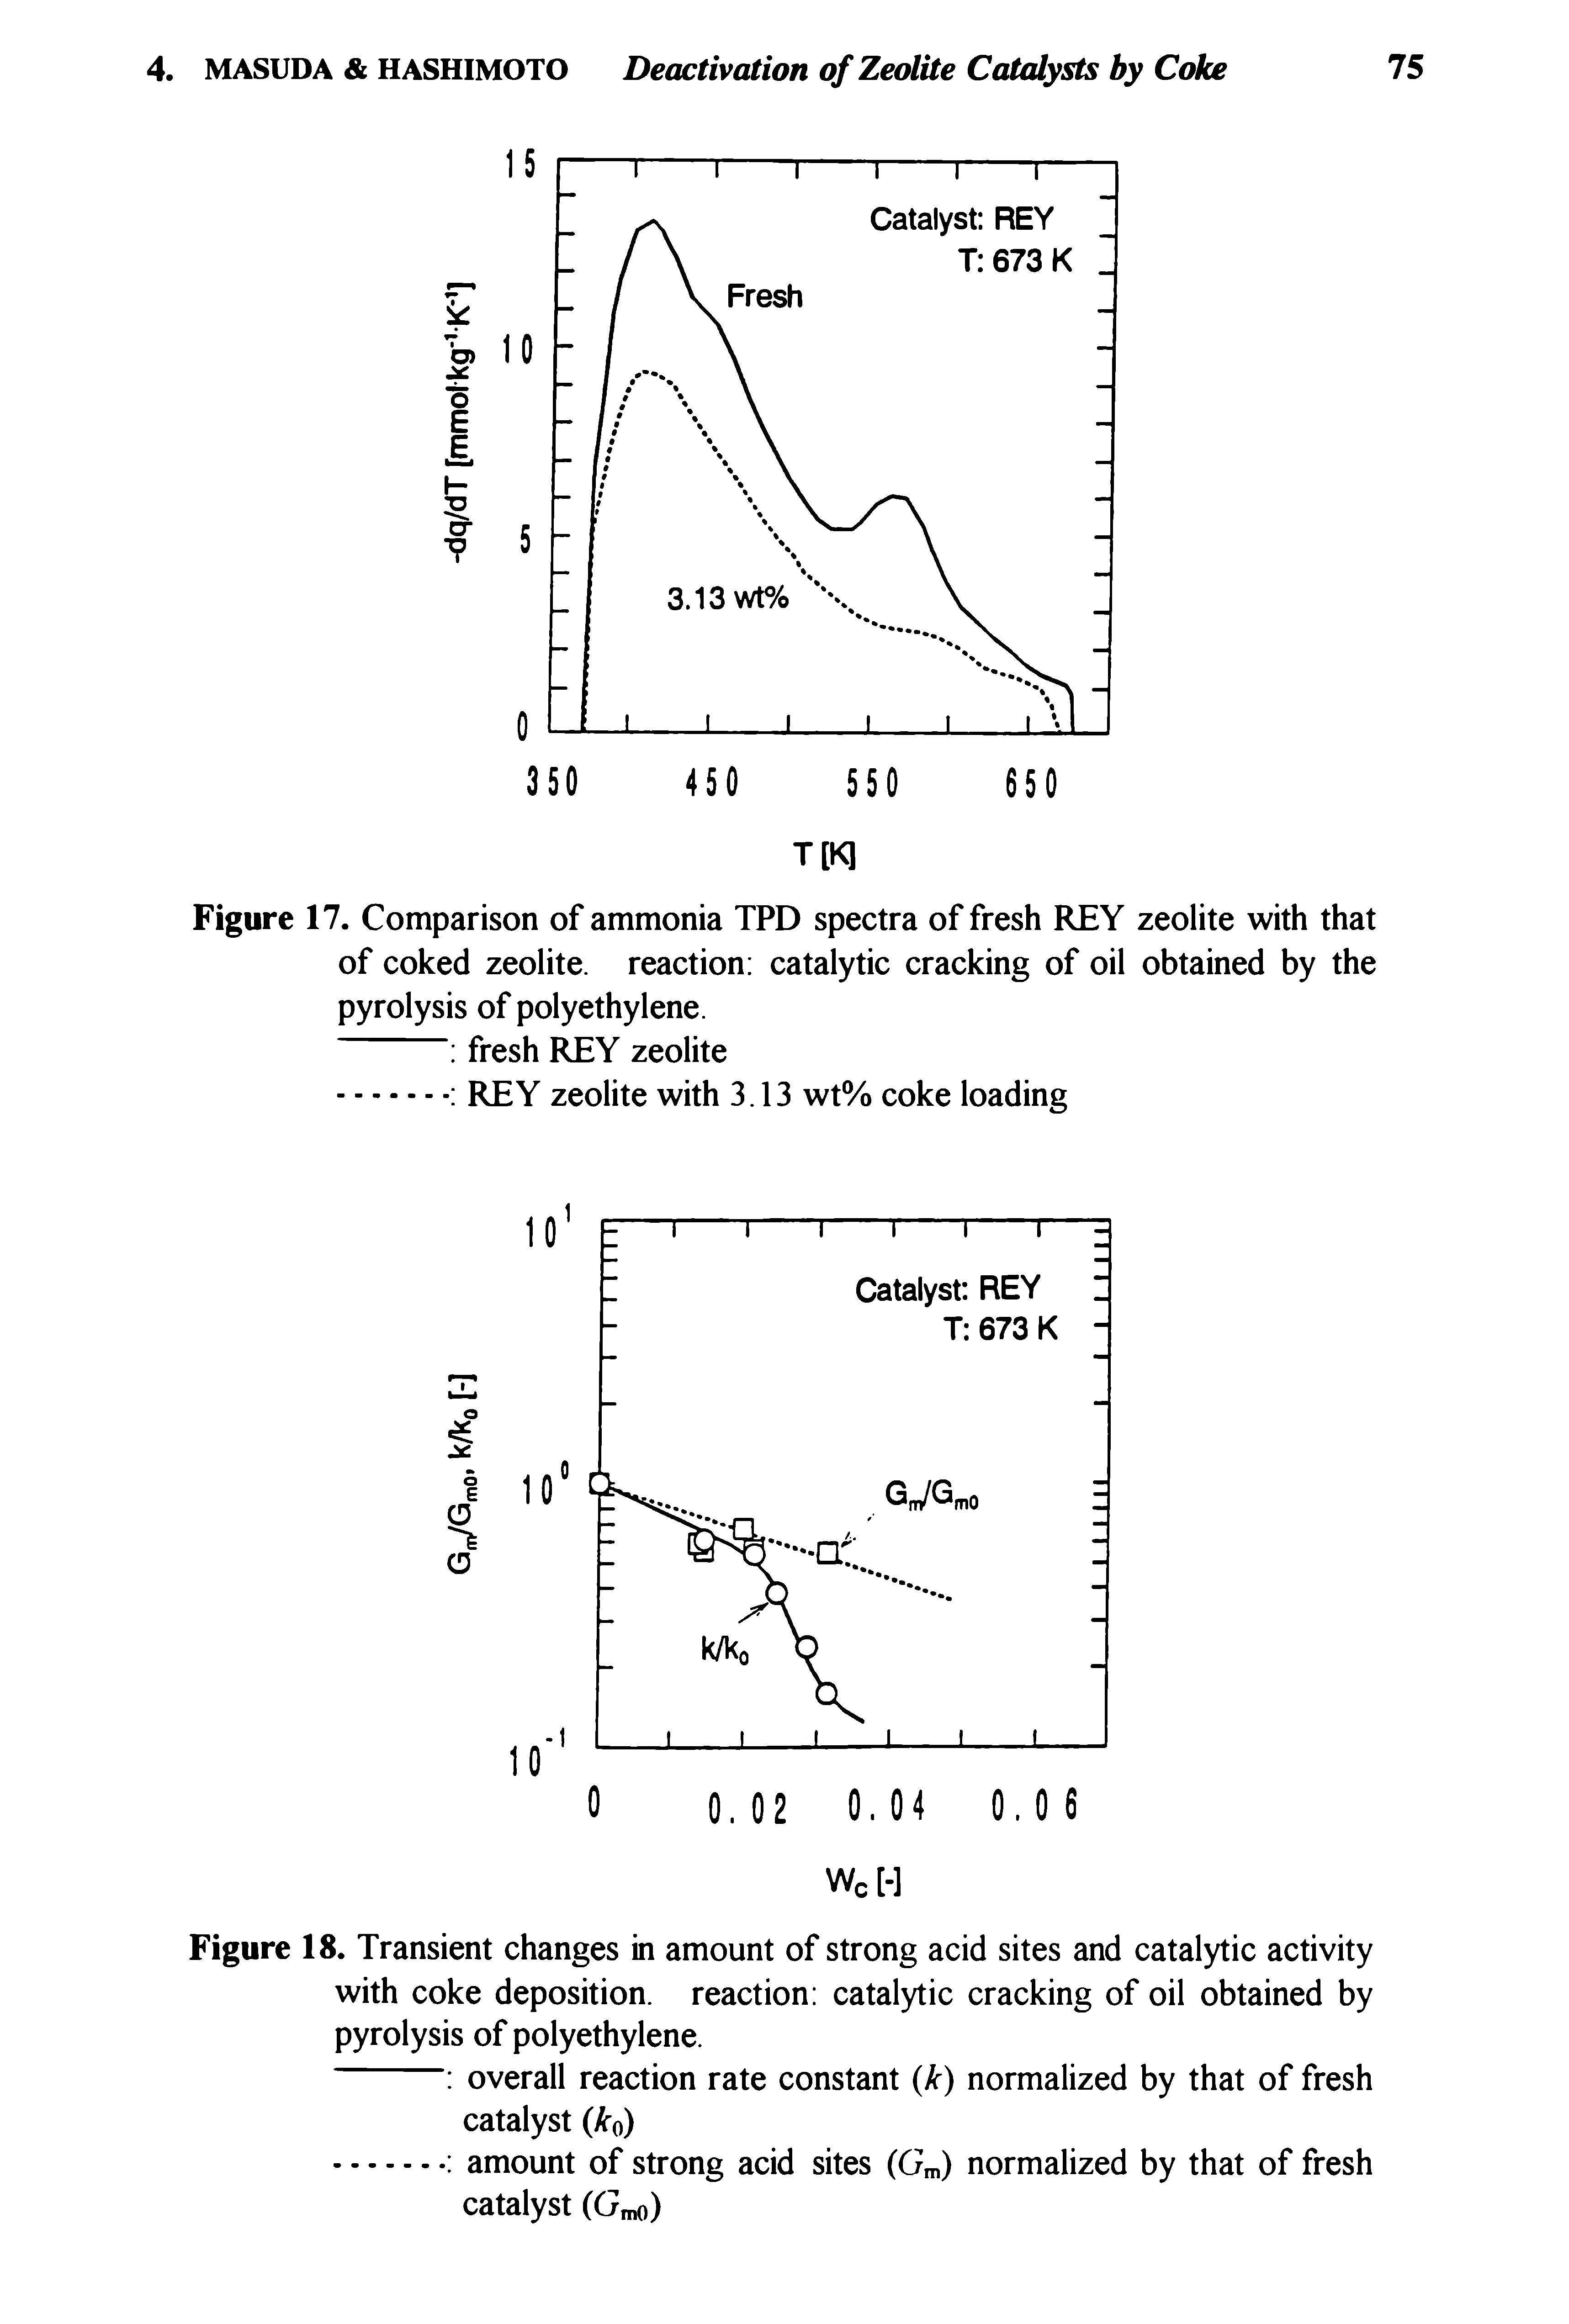 Figure 17. Comparison of ammonia TPD spectra of fresh REY zeolite with that of coked zeolite, reaction catalytic cracking of oil obtained by the pyrolysis of polyethylene.